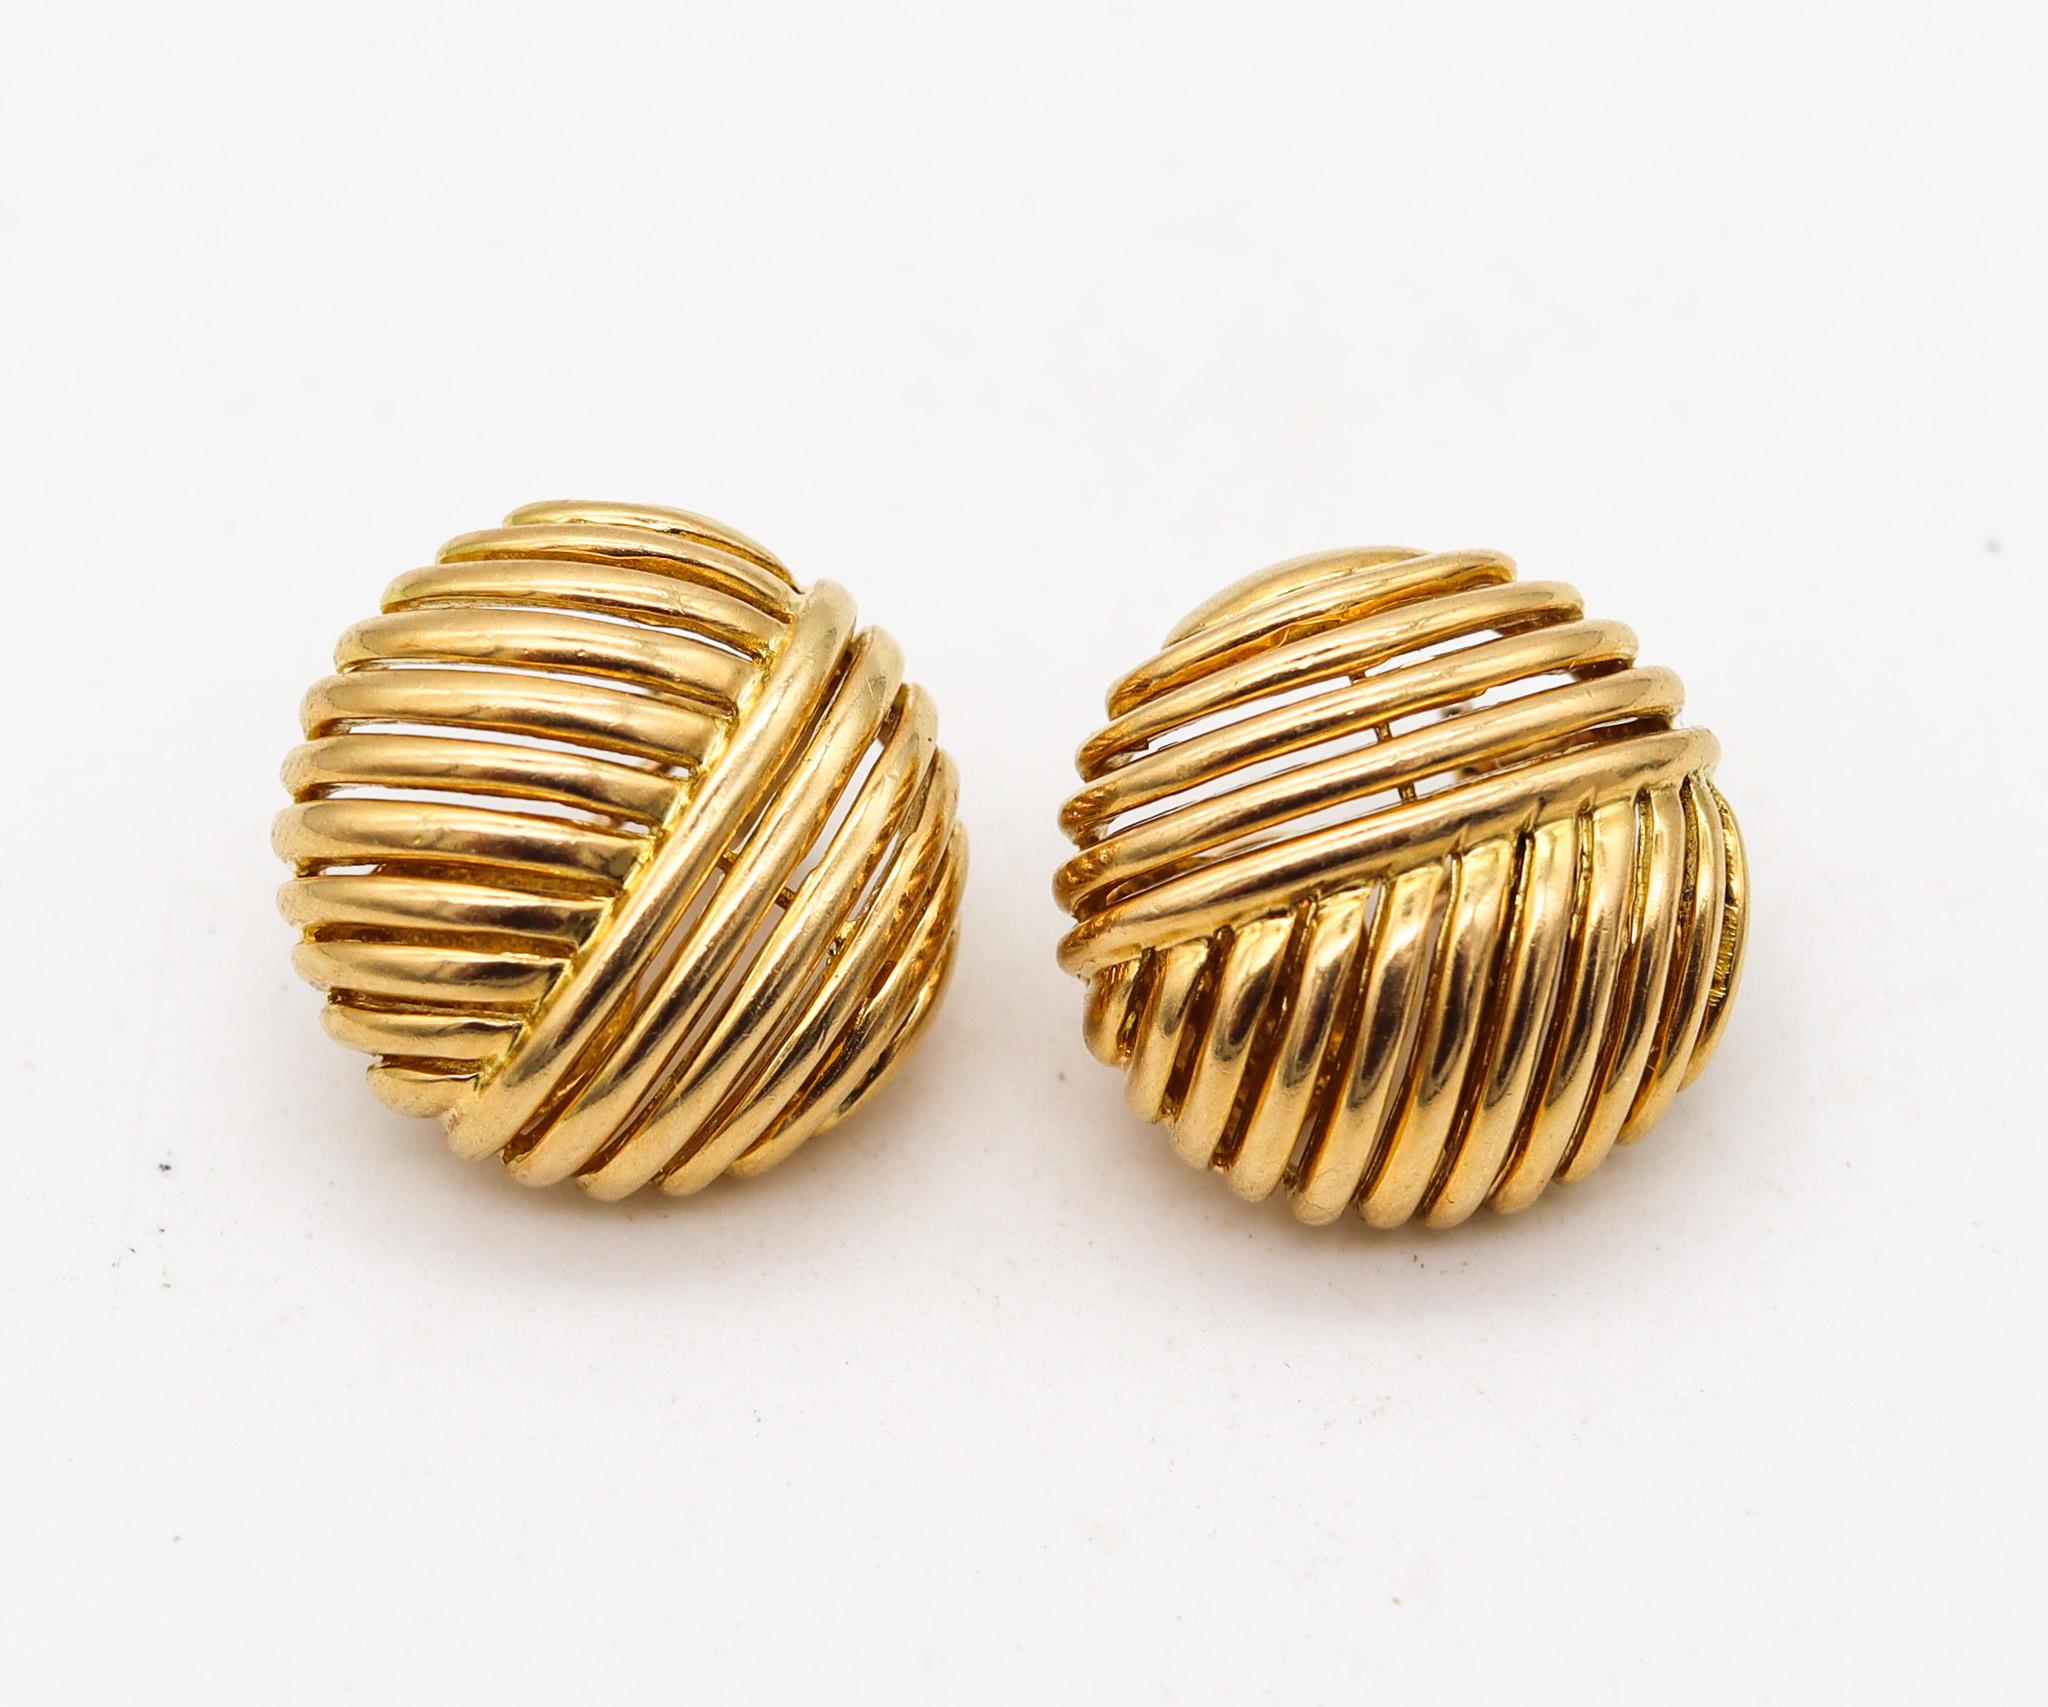 Pair of buttons earrings designed by Tiffany & Co.

Beautiful every day pair of clips earrings, created at the Tiffany Studios, back in the 1980. Crafted with a bombe geometric patterns in solid yellow gold of 18 karats with polished finish. They